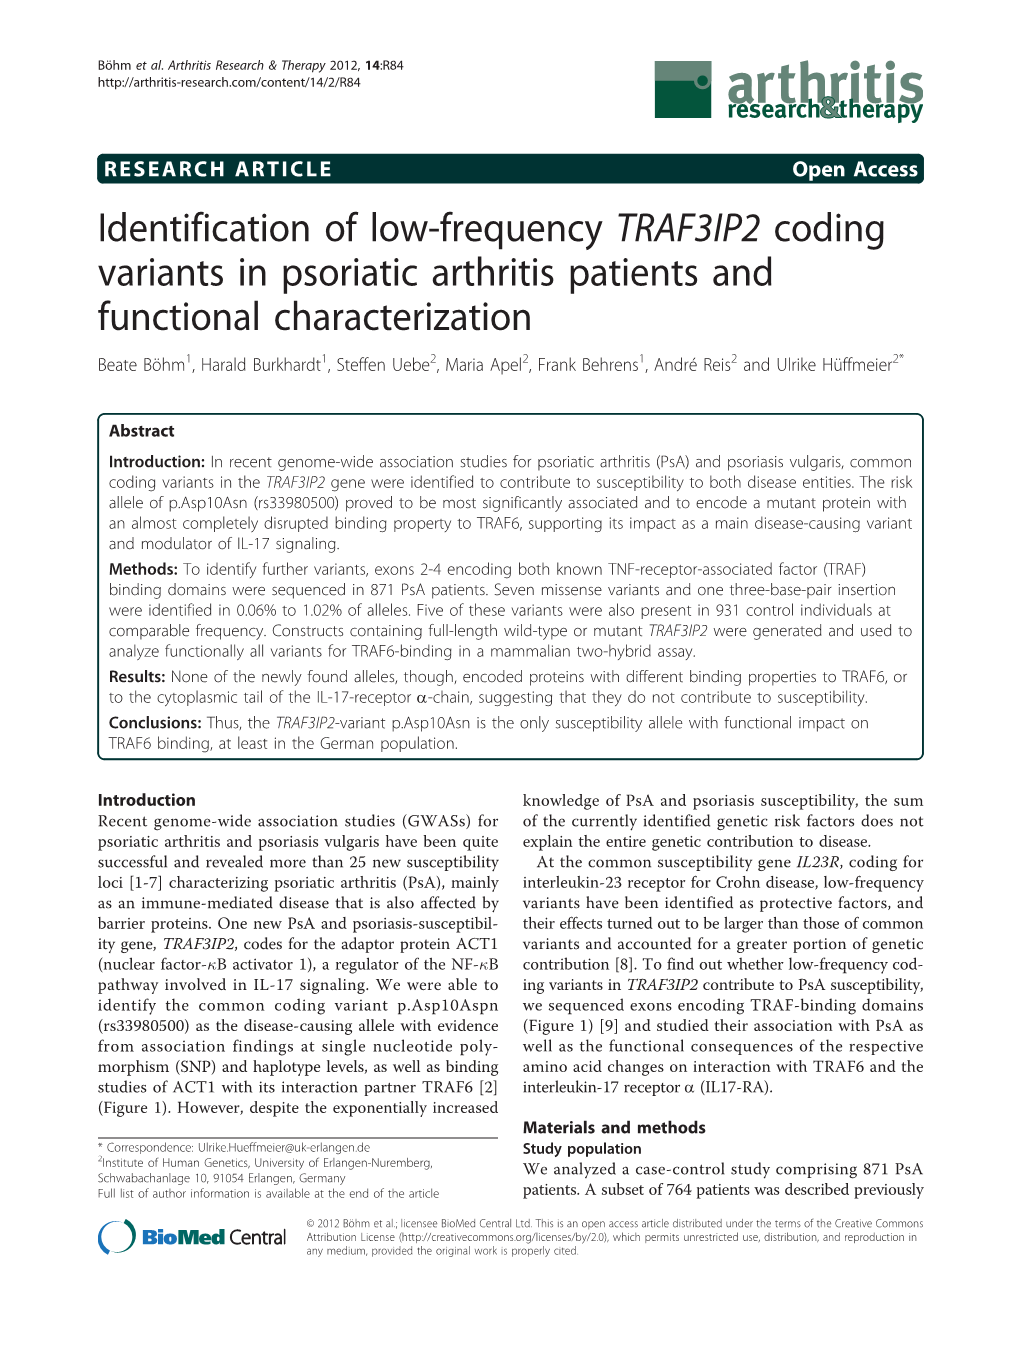 Identification of Low-Frequency TRAF3IP2 Coding Variants in Psoriatic Arthritis Patients and Functional Characterization